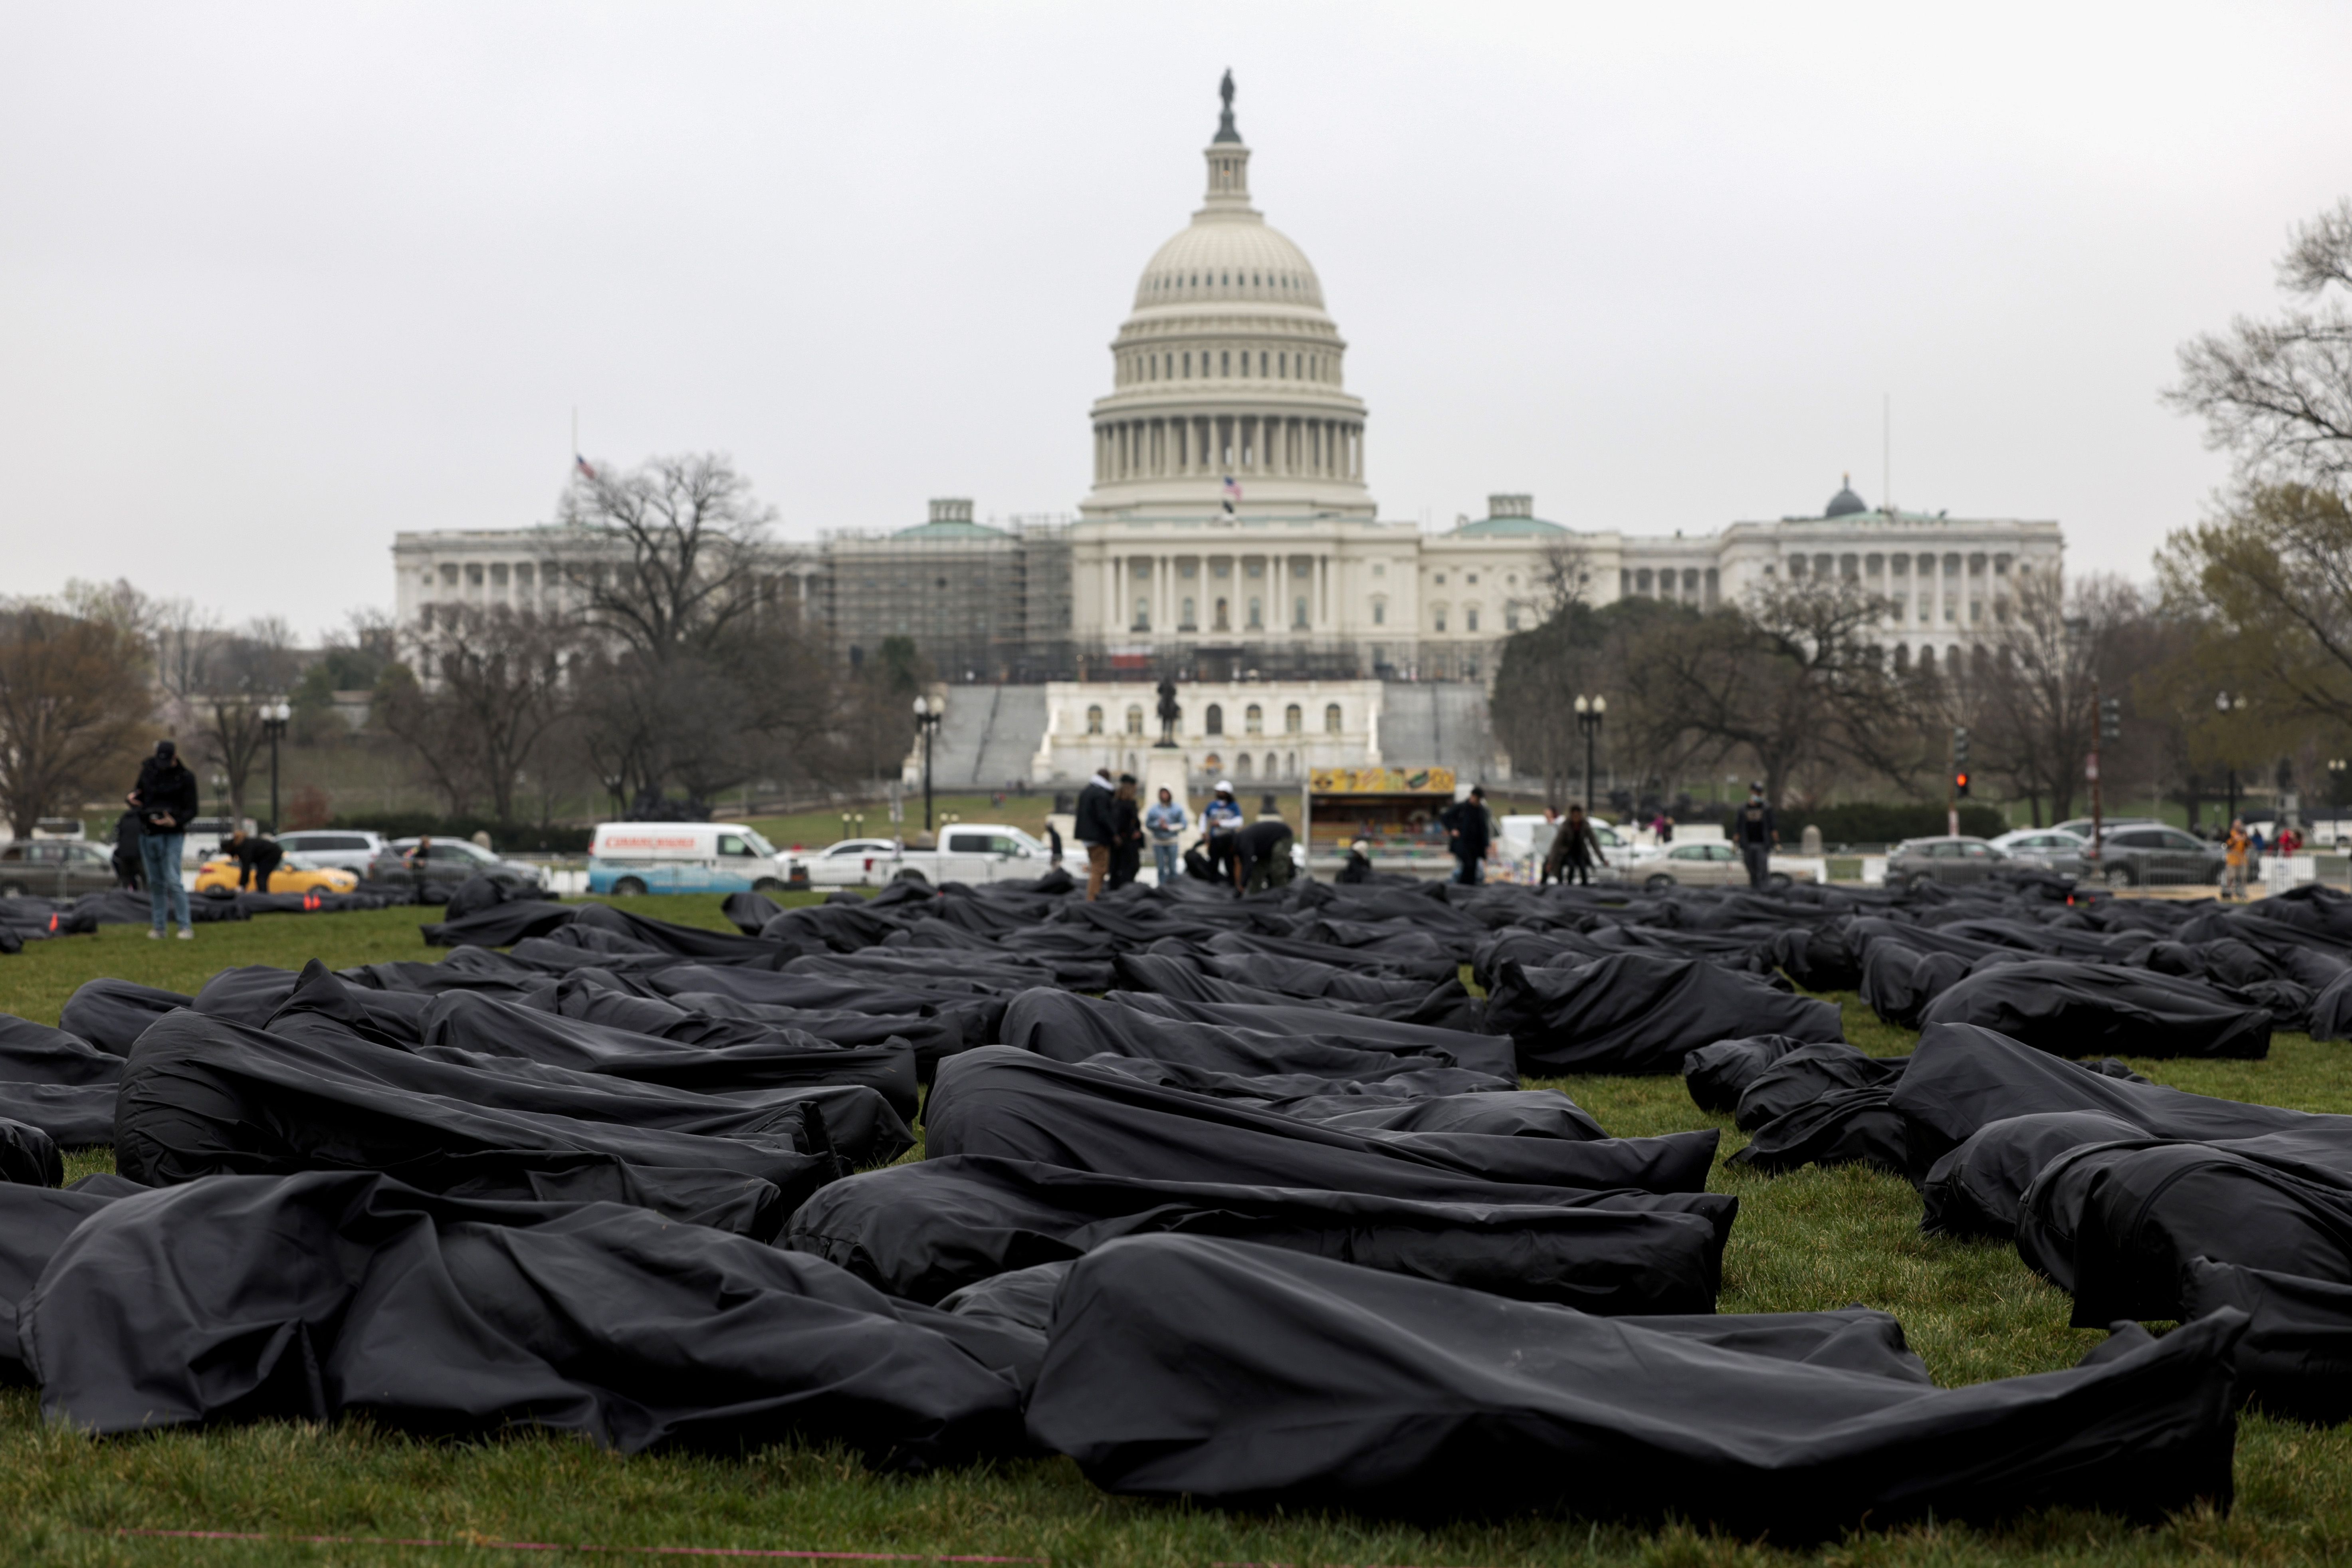 ody bags are assembled on the National Mall by gun control activist group March For Our Lives on March 24, 2022 in Washington, DC. 